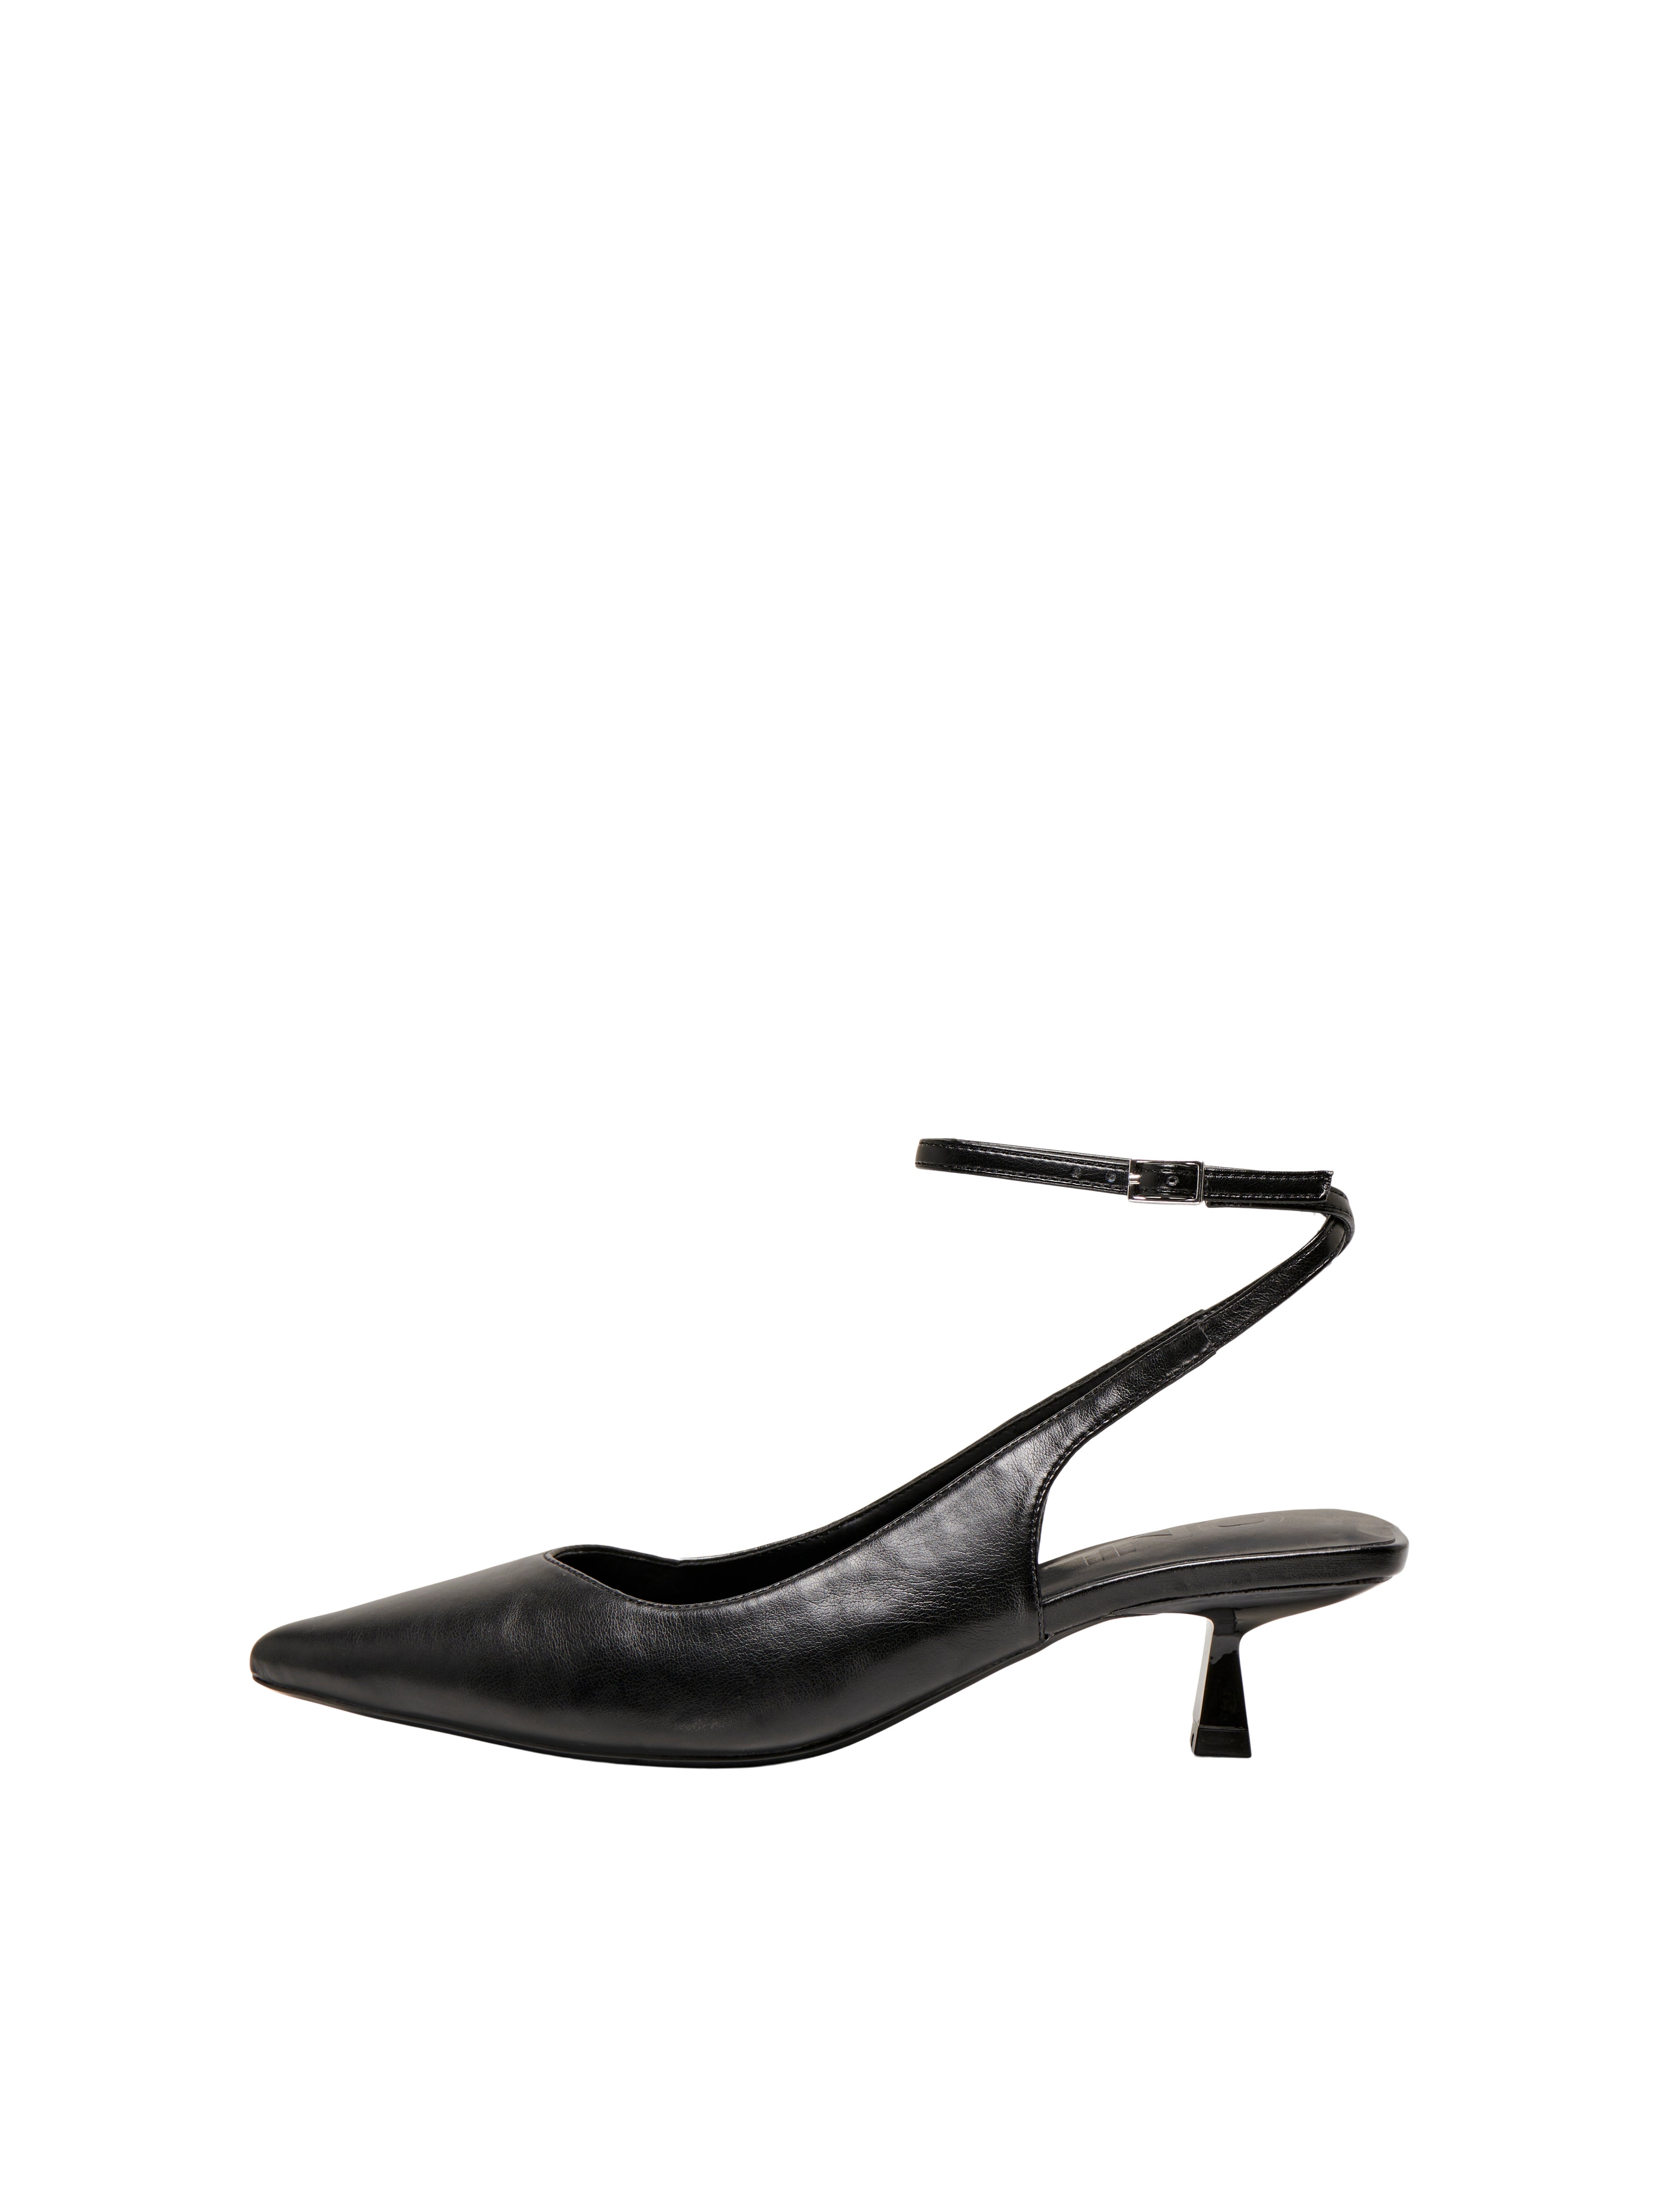 Black high heels elegant shoes with slightly pointed toe tip